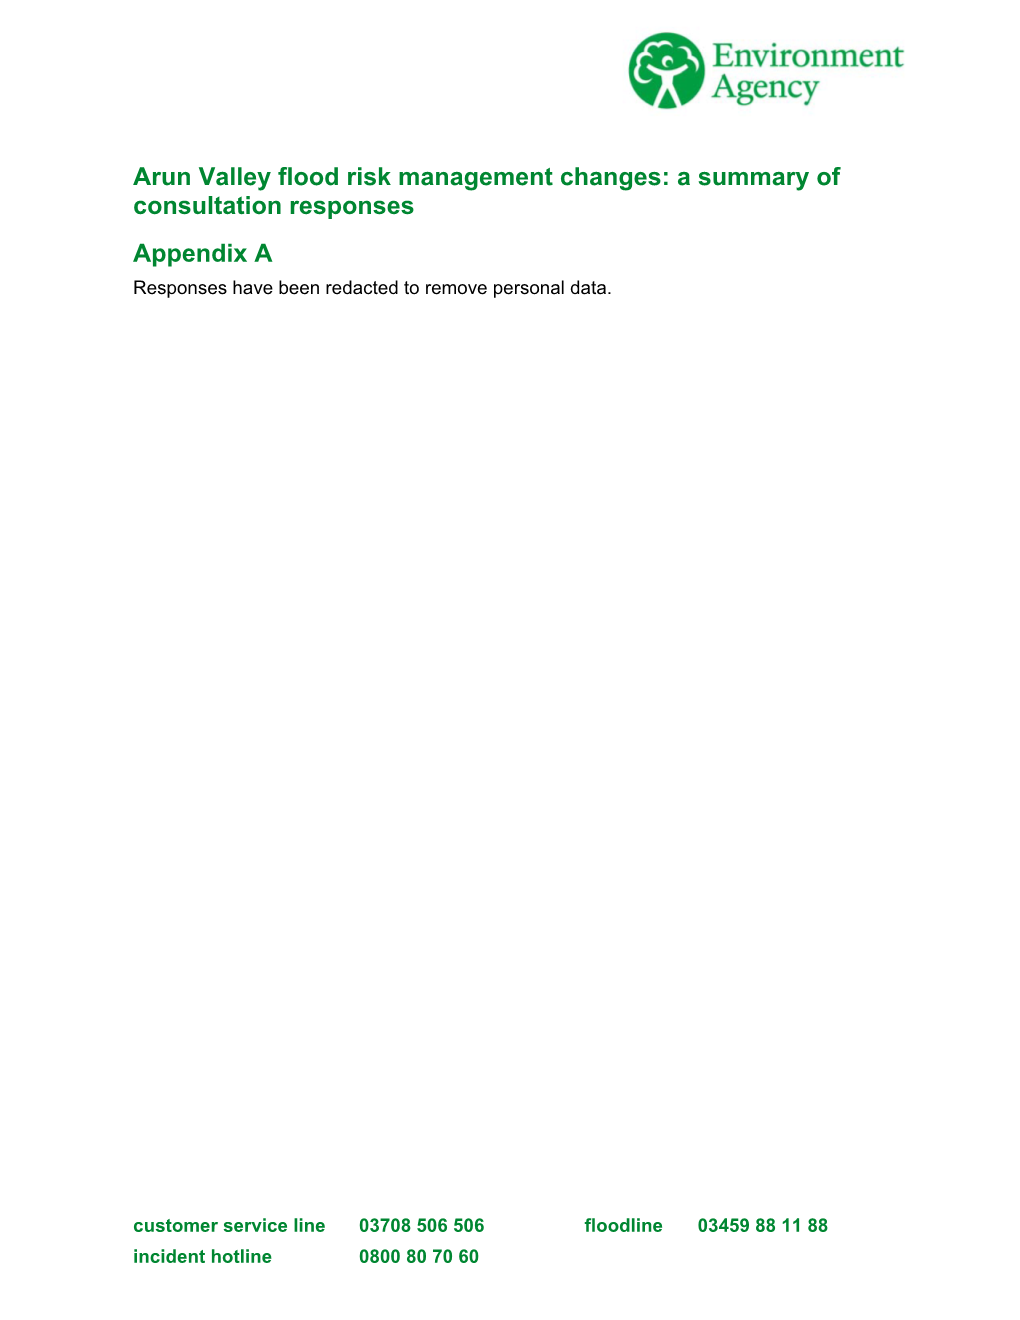 Arun Valley Flood Risk Management Changes: a Summary of Consultation Responses Appendix a Responses Have Been Redacted to Remove Personal Data